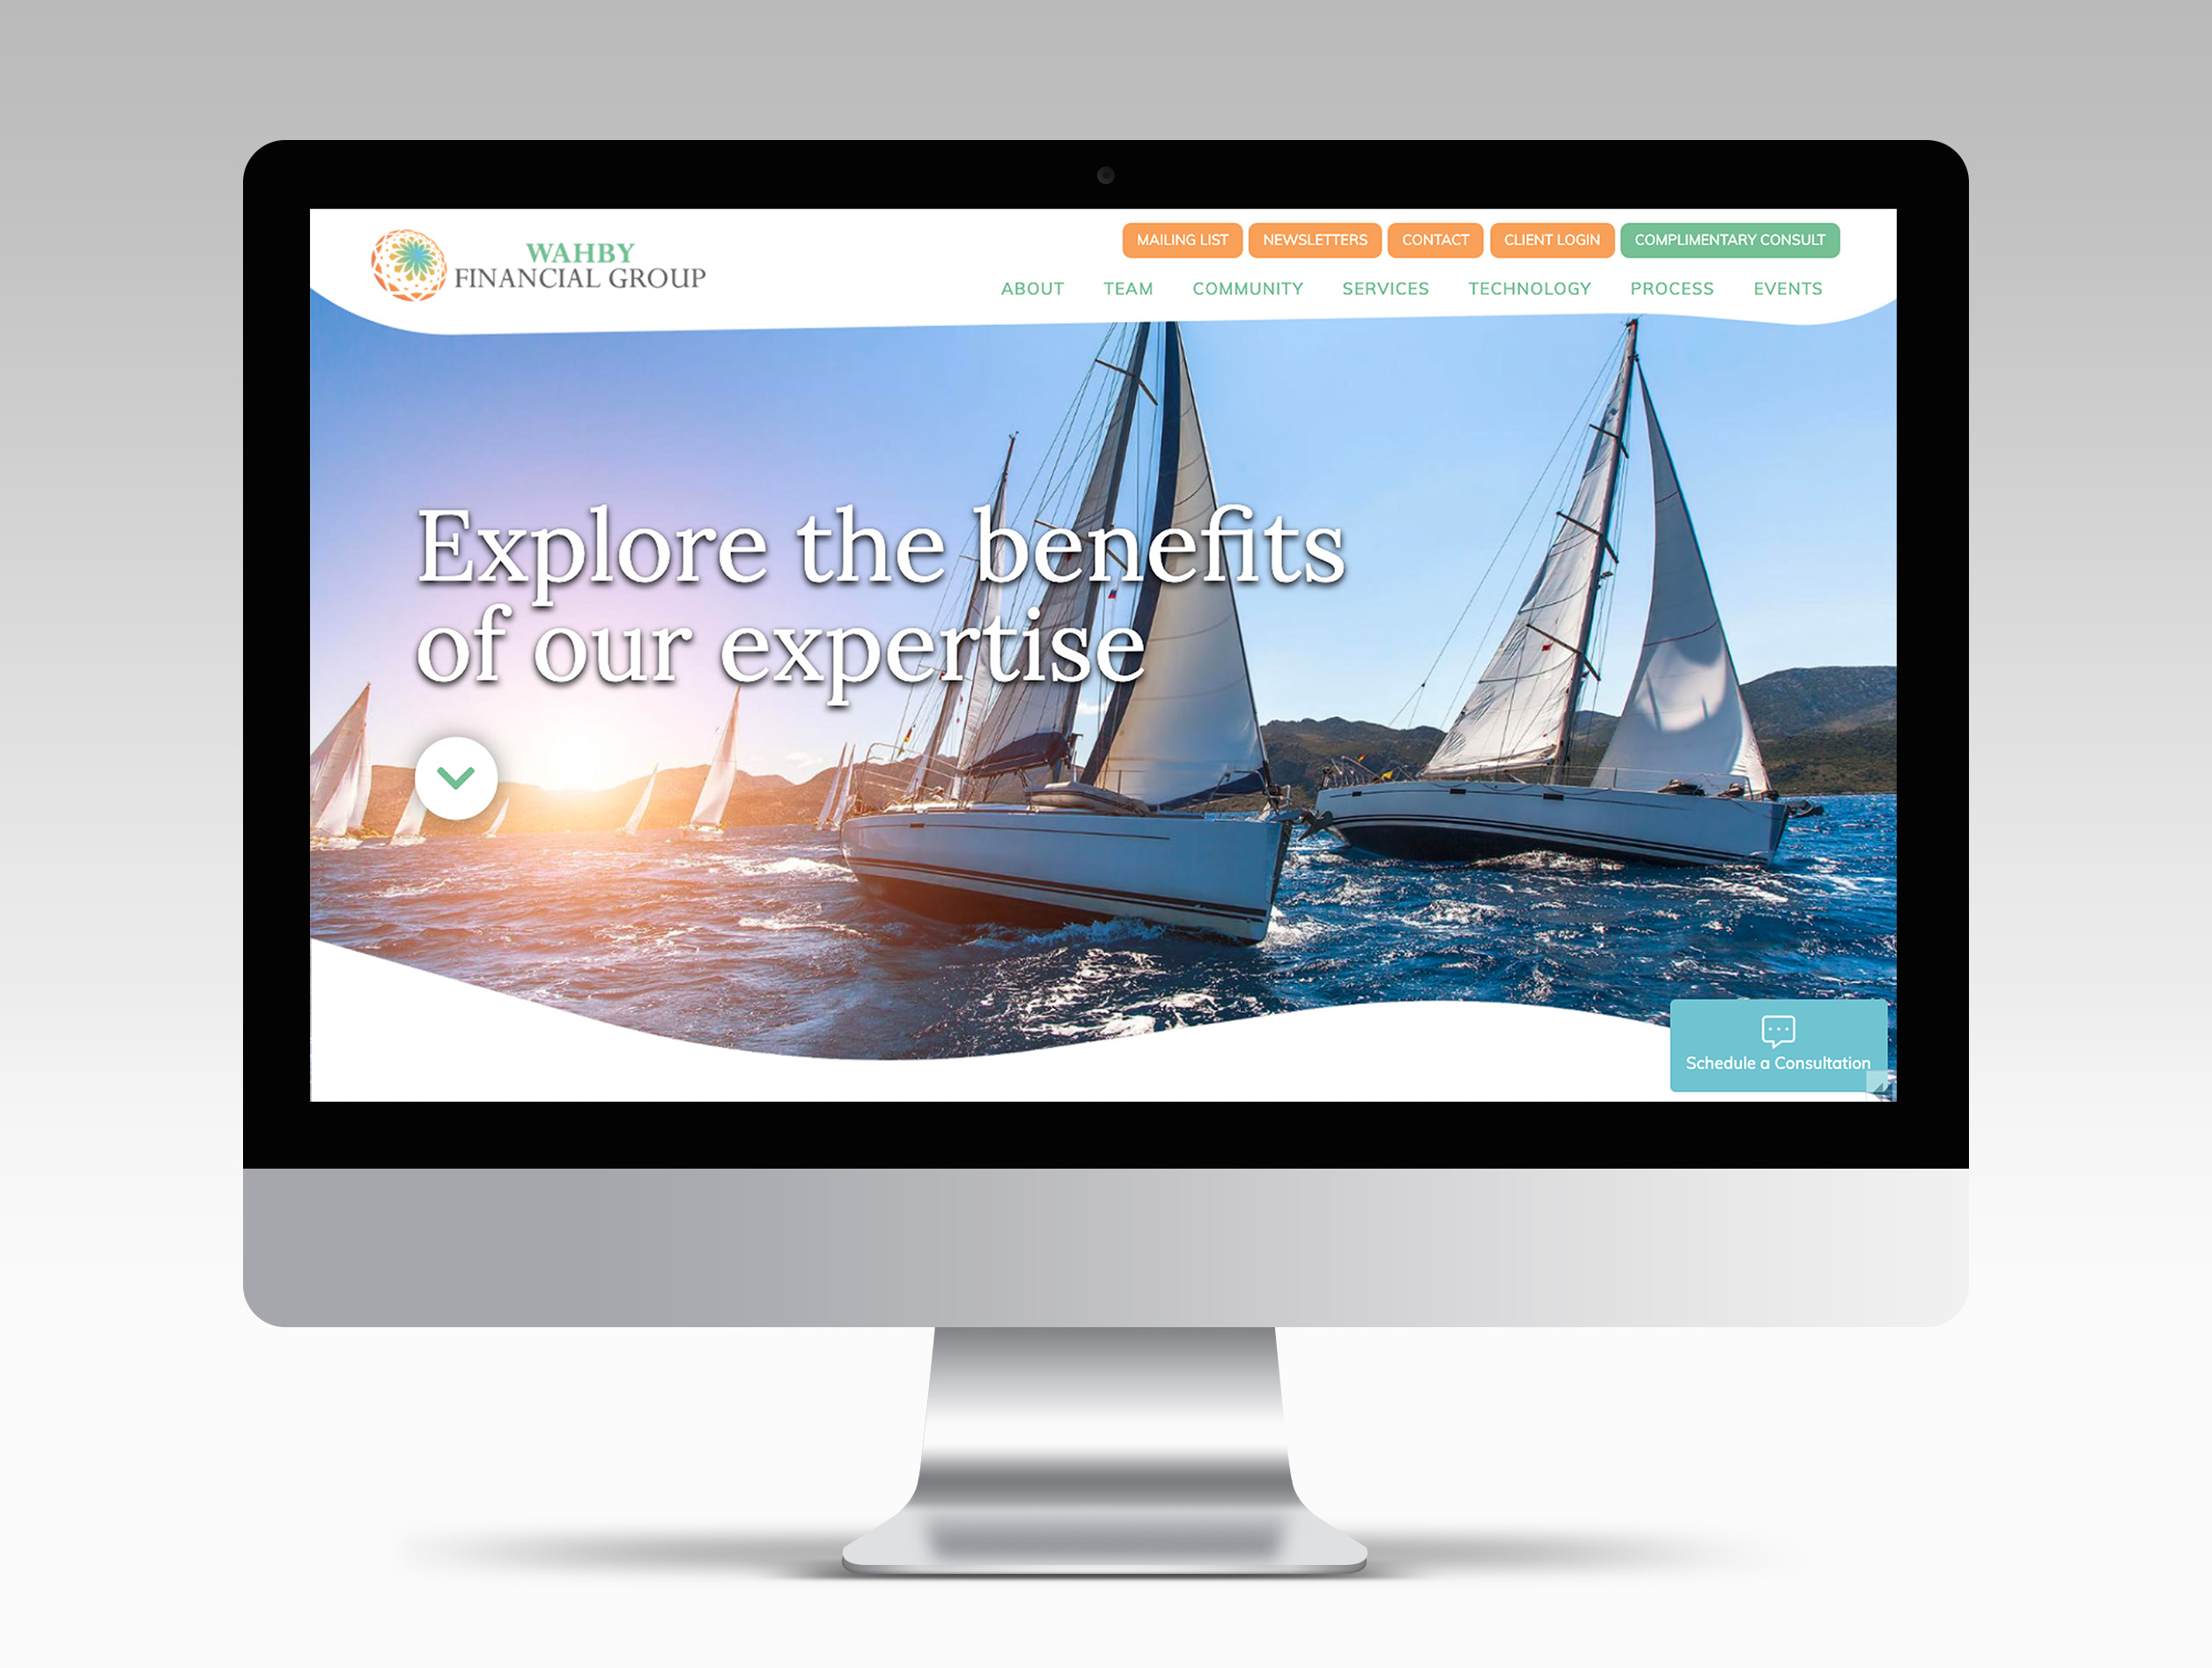 Wahby Financial Group Website